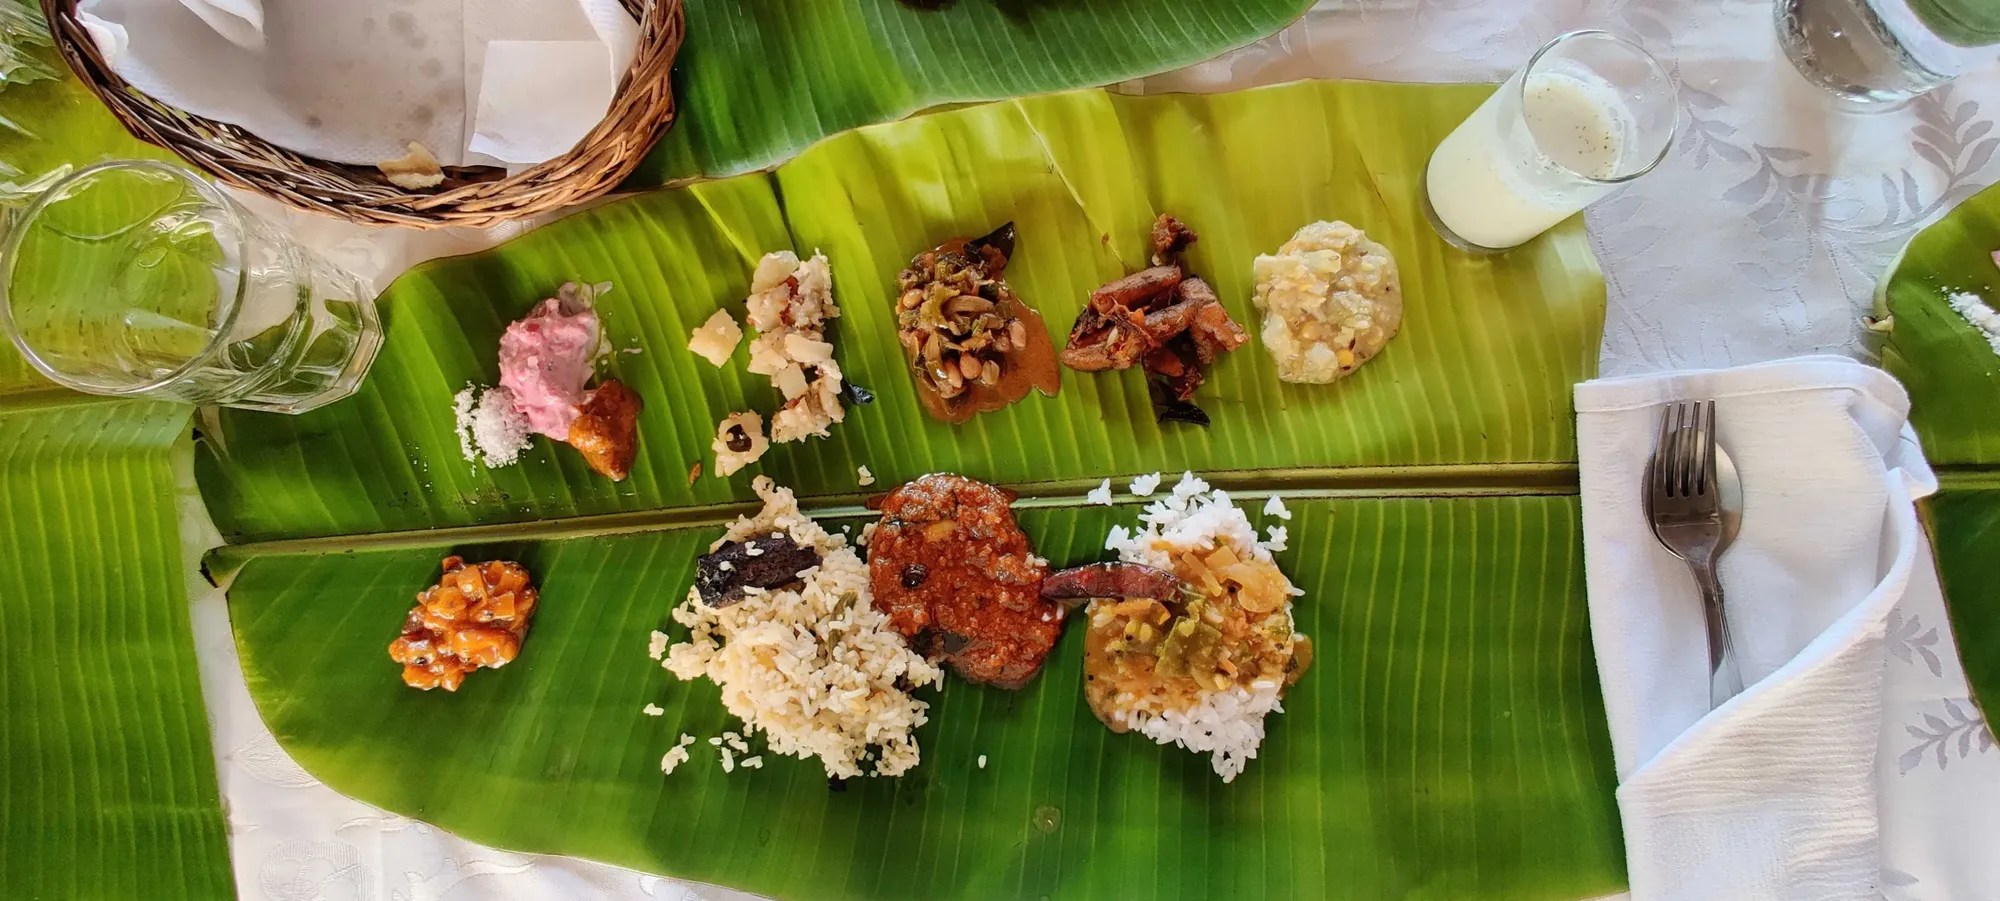 Traditional Chettinad Meals Served On A Banana Leaf